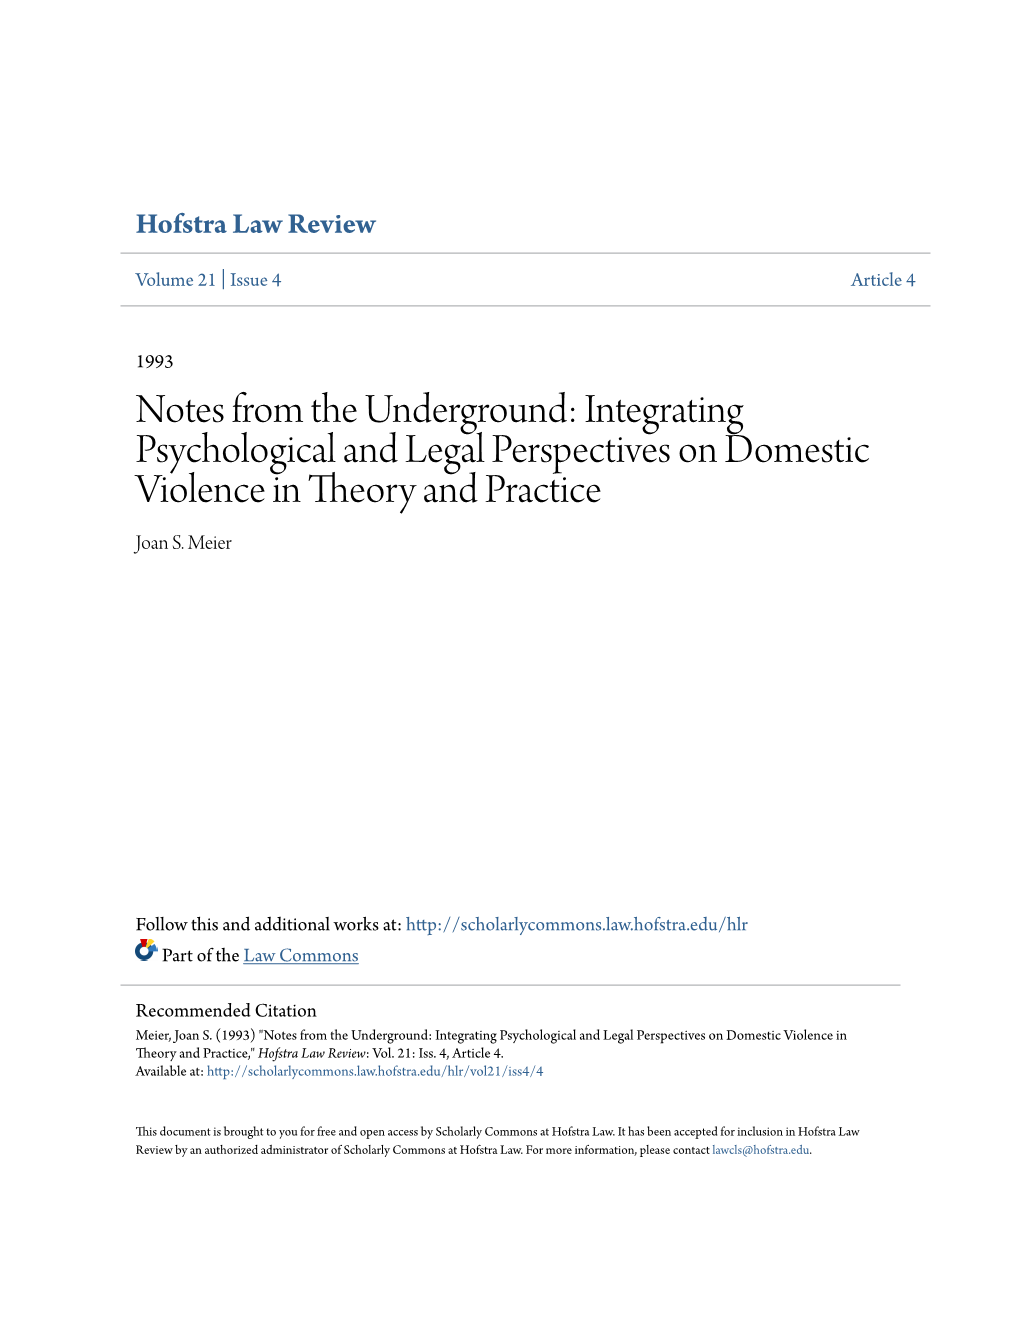 Integrating Psychological and Legal Perspectives on Domestic Violence in Theory and Practice Joan S